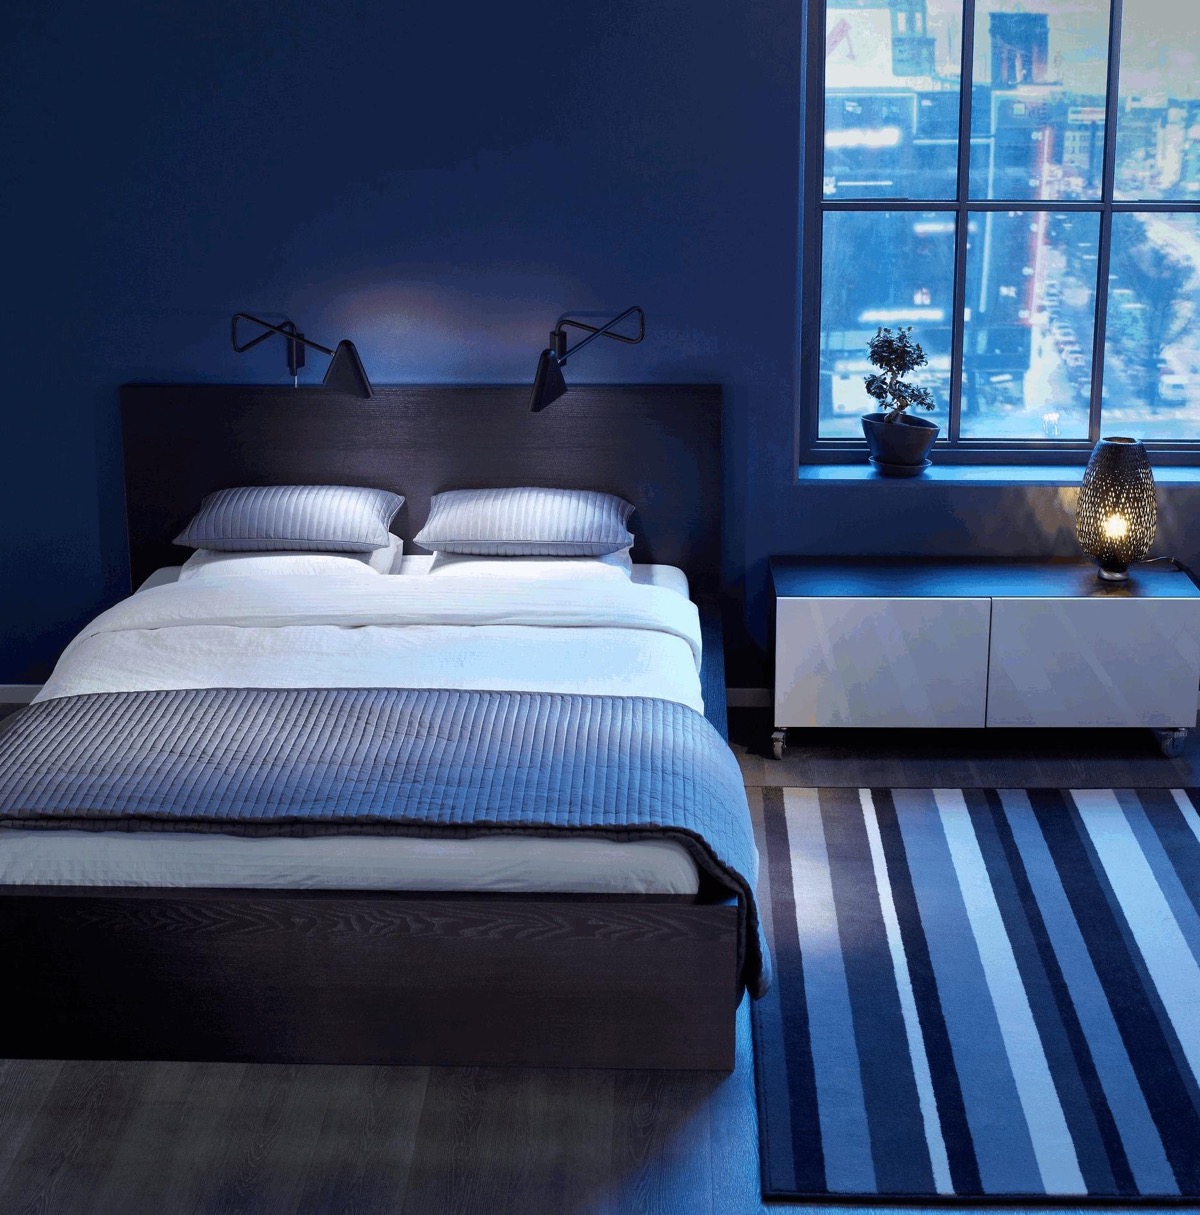 30 Buoyant Blue Bedrooms That Add Tranquility And Calm To Your Sleeping Space,New York Times Travel Editor Contact